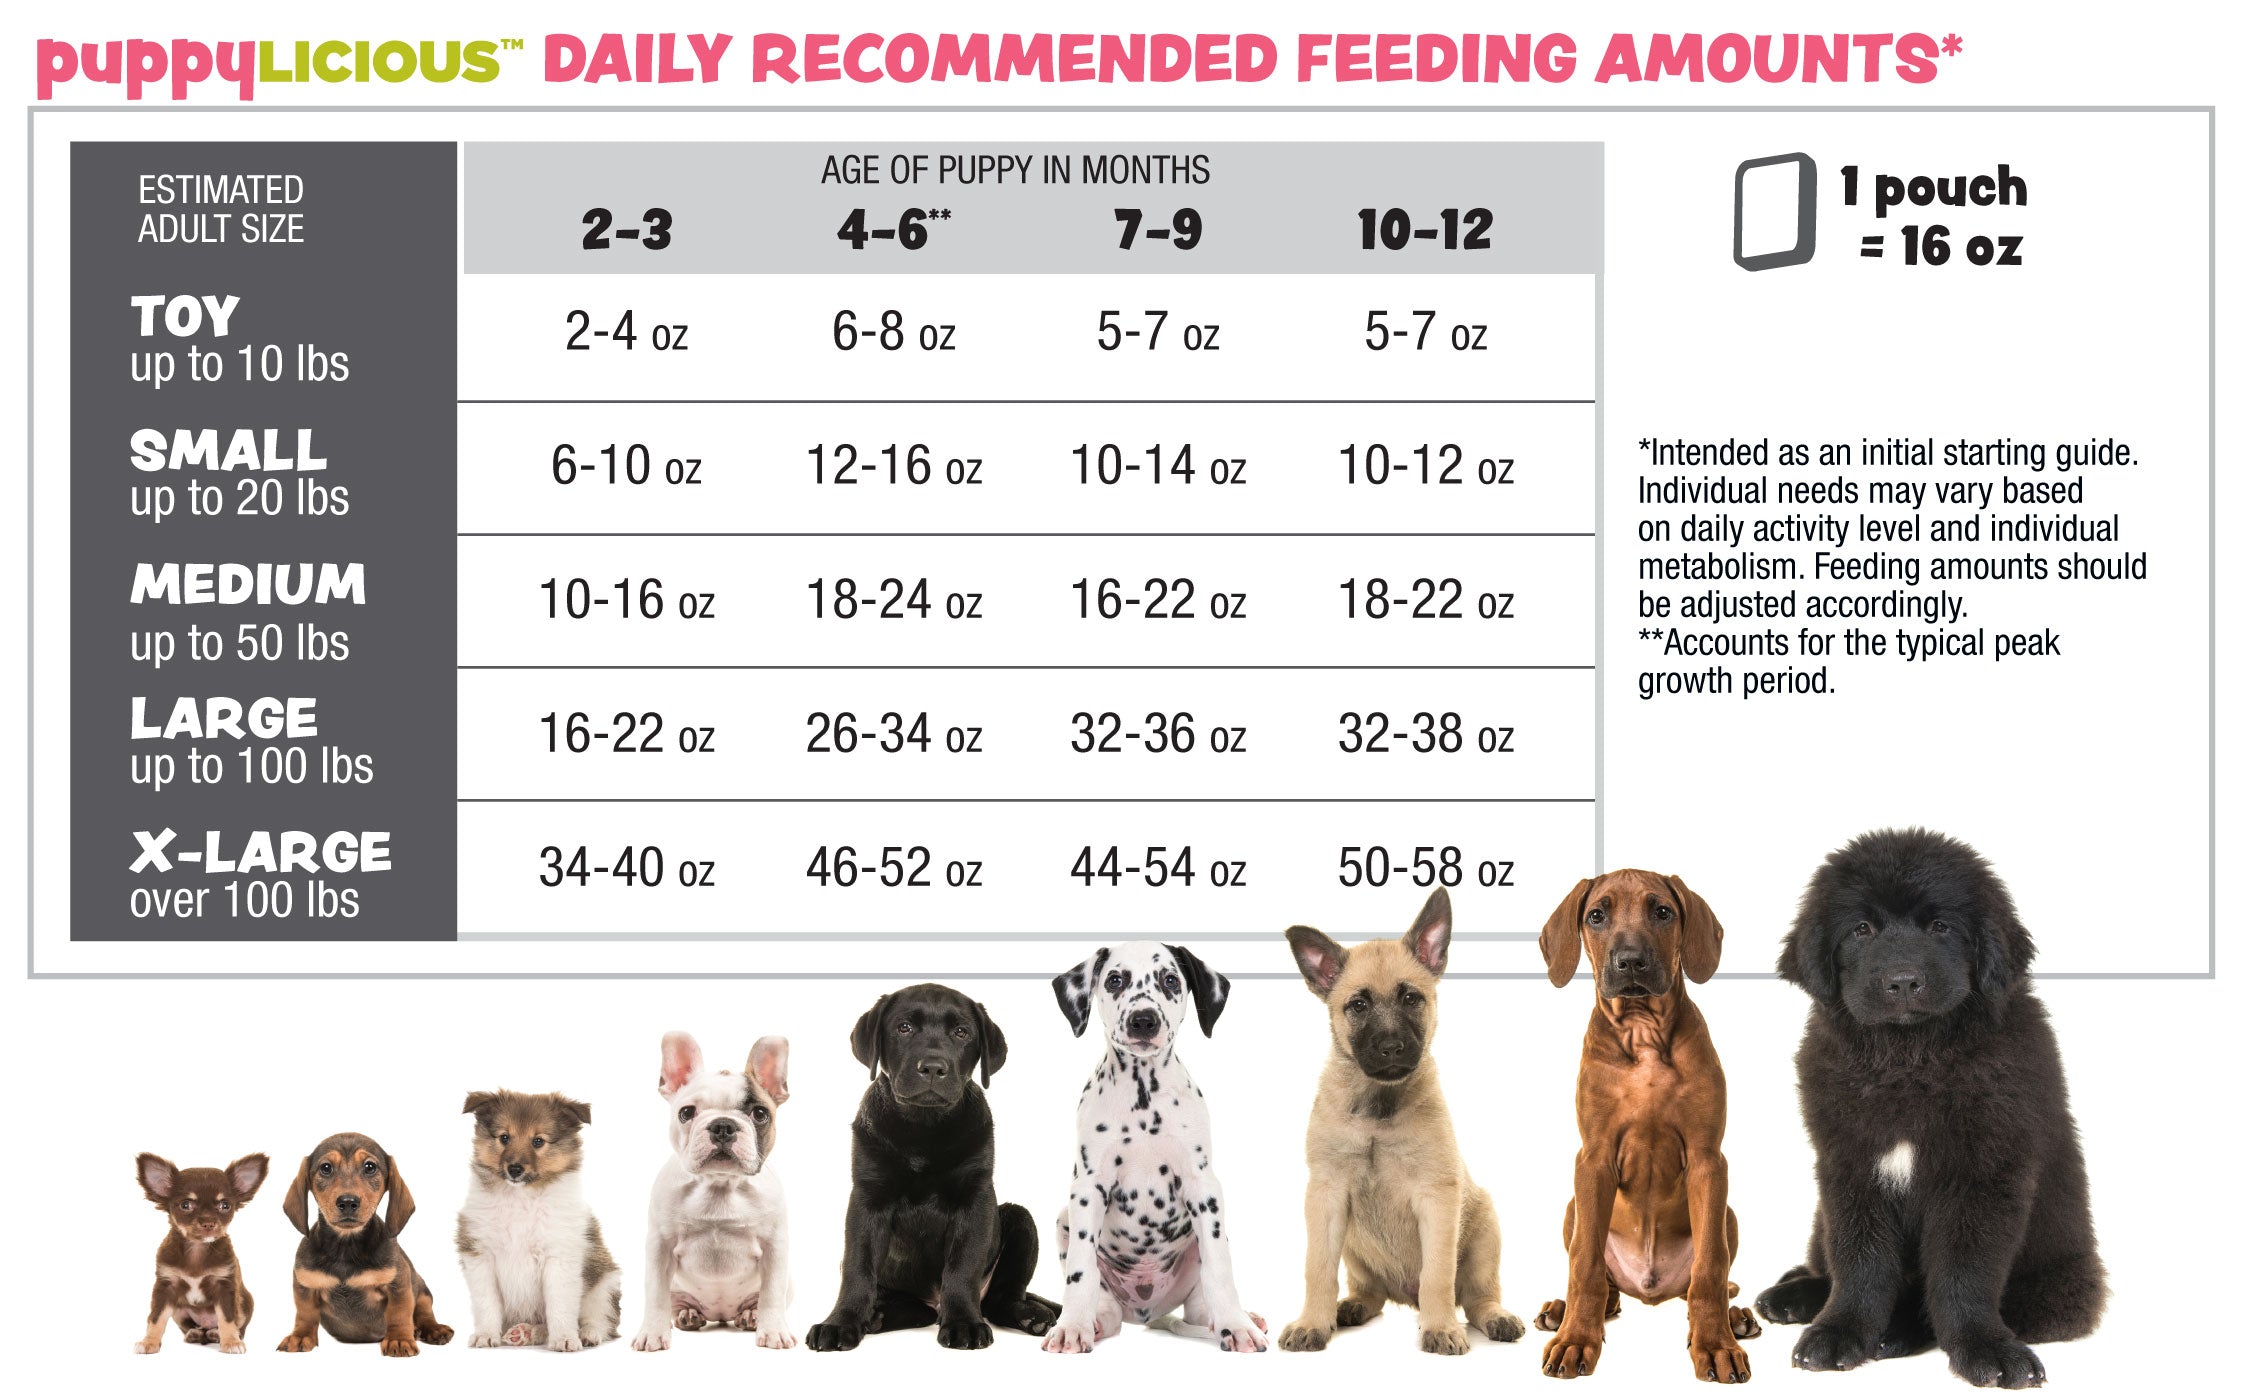 how much food should a 70 pound dog eat